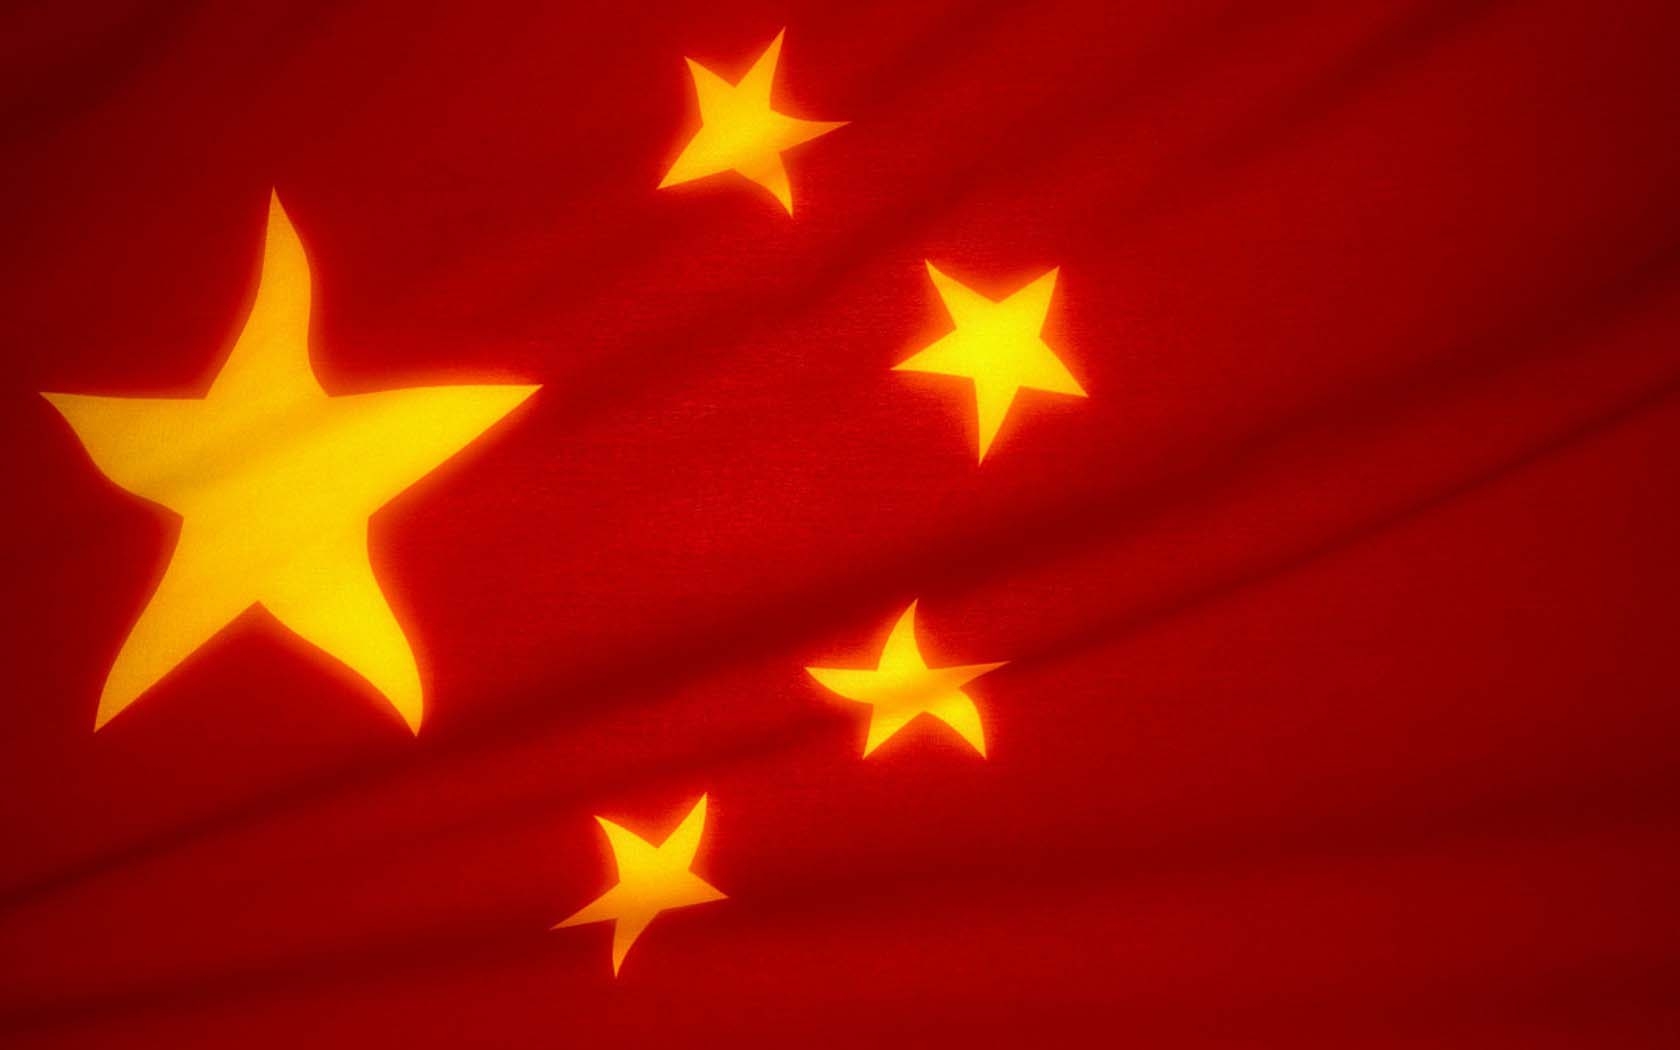 Download Wallpapers Download 1280x1024 china flag wall